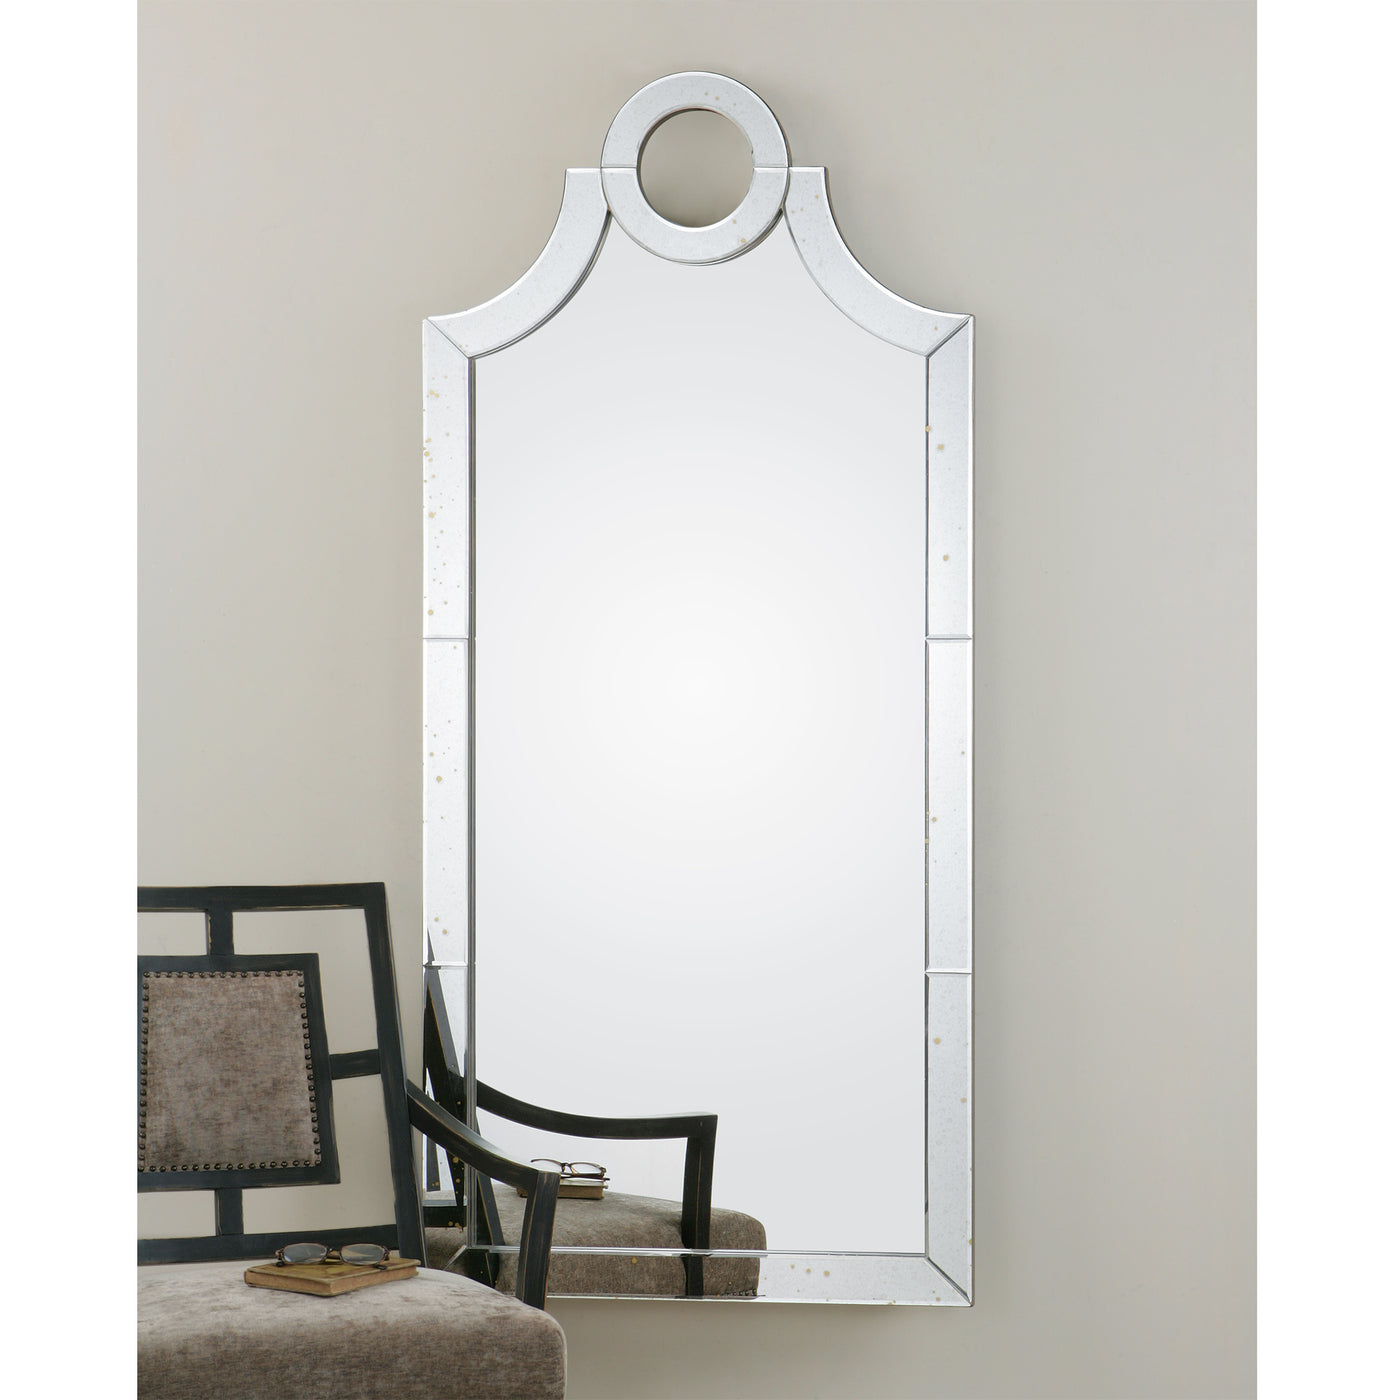 Frame Is Constructed Of Lightly Antiqued, Beveled Mirror Tiles.